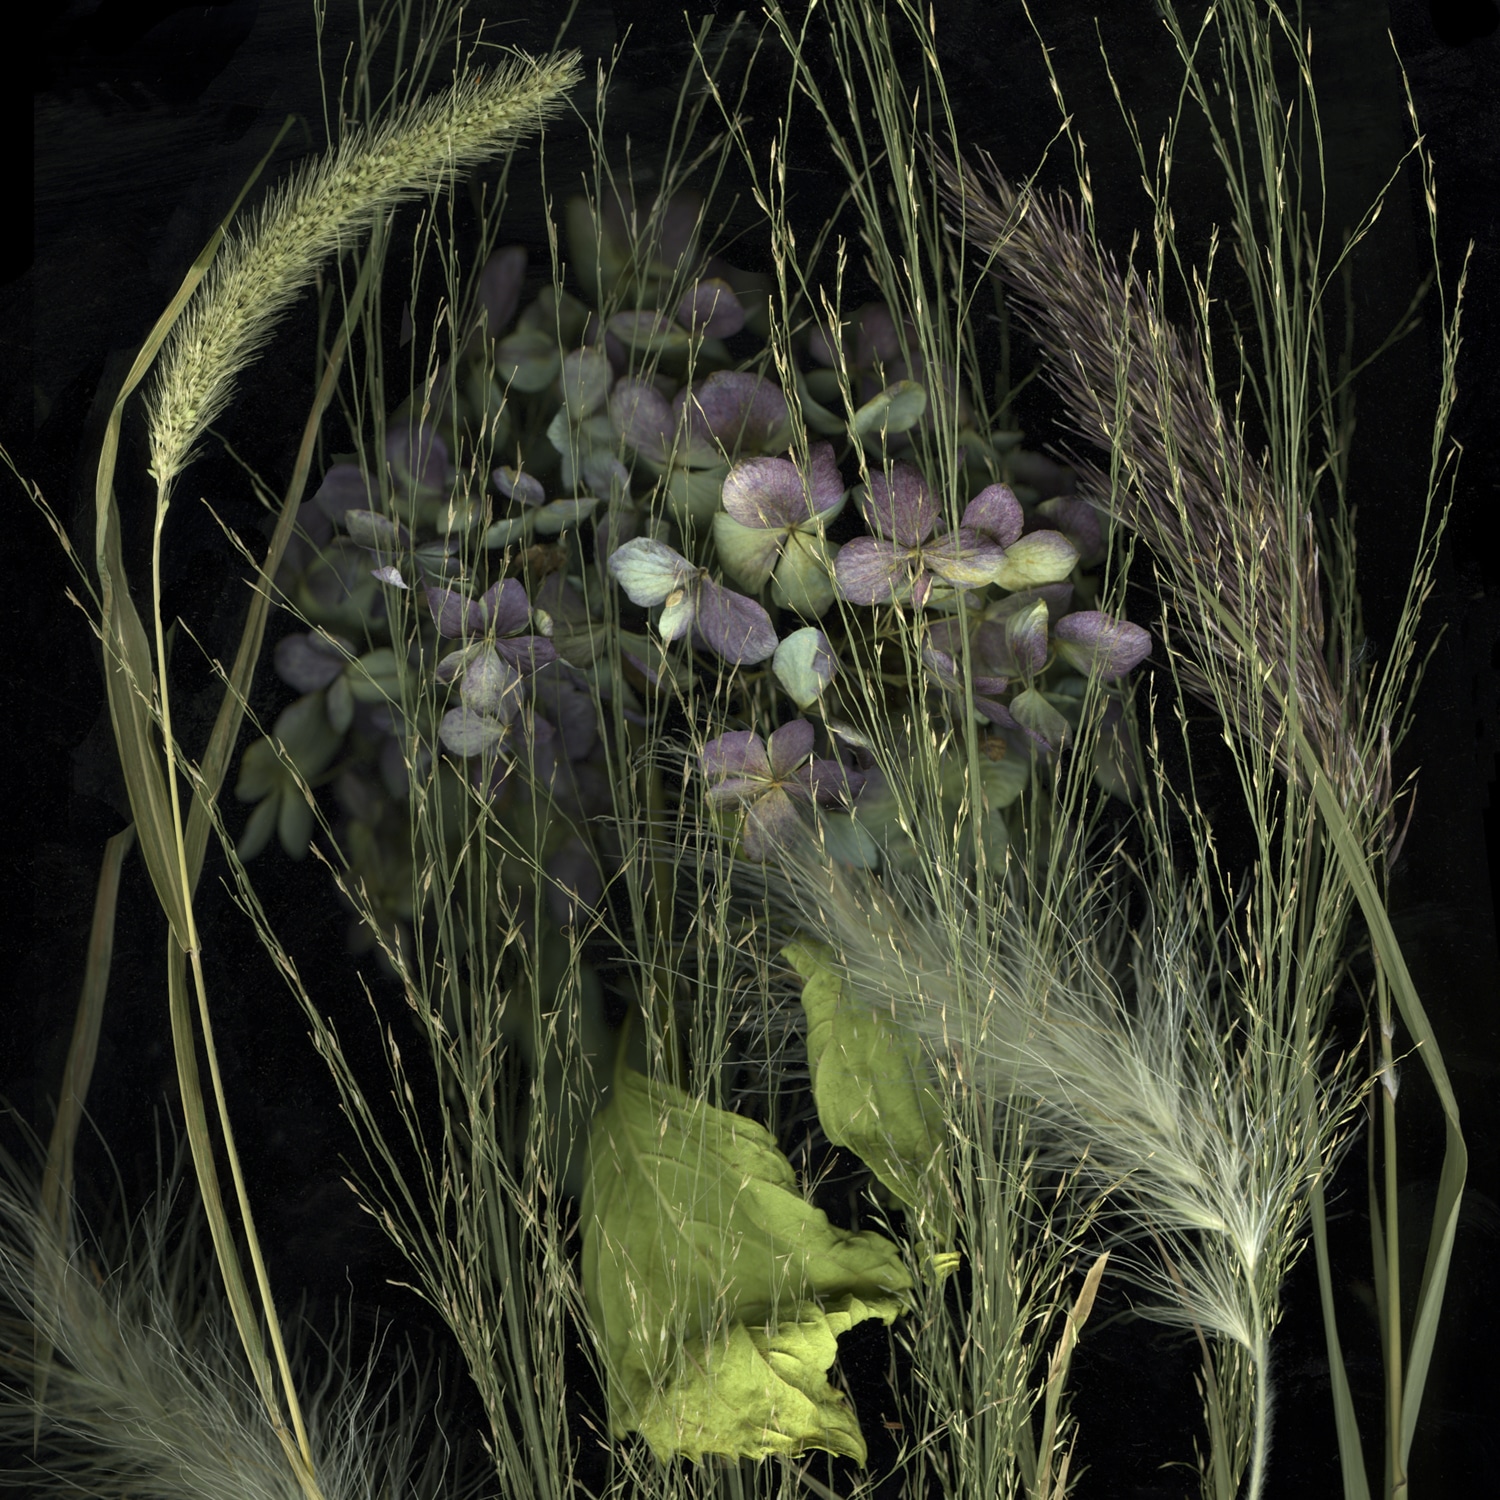 Grasses and Hydrangia, Marcy Juran